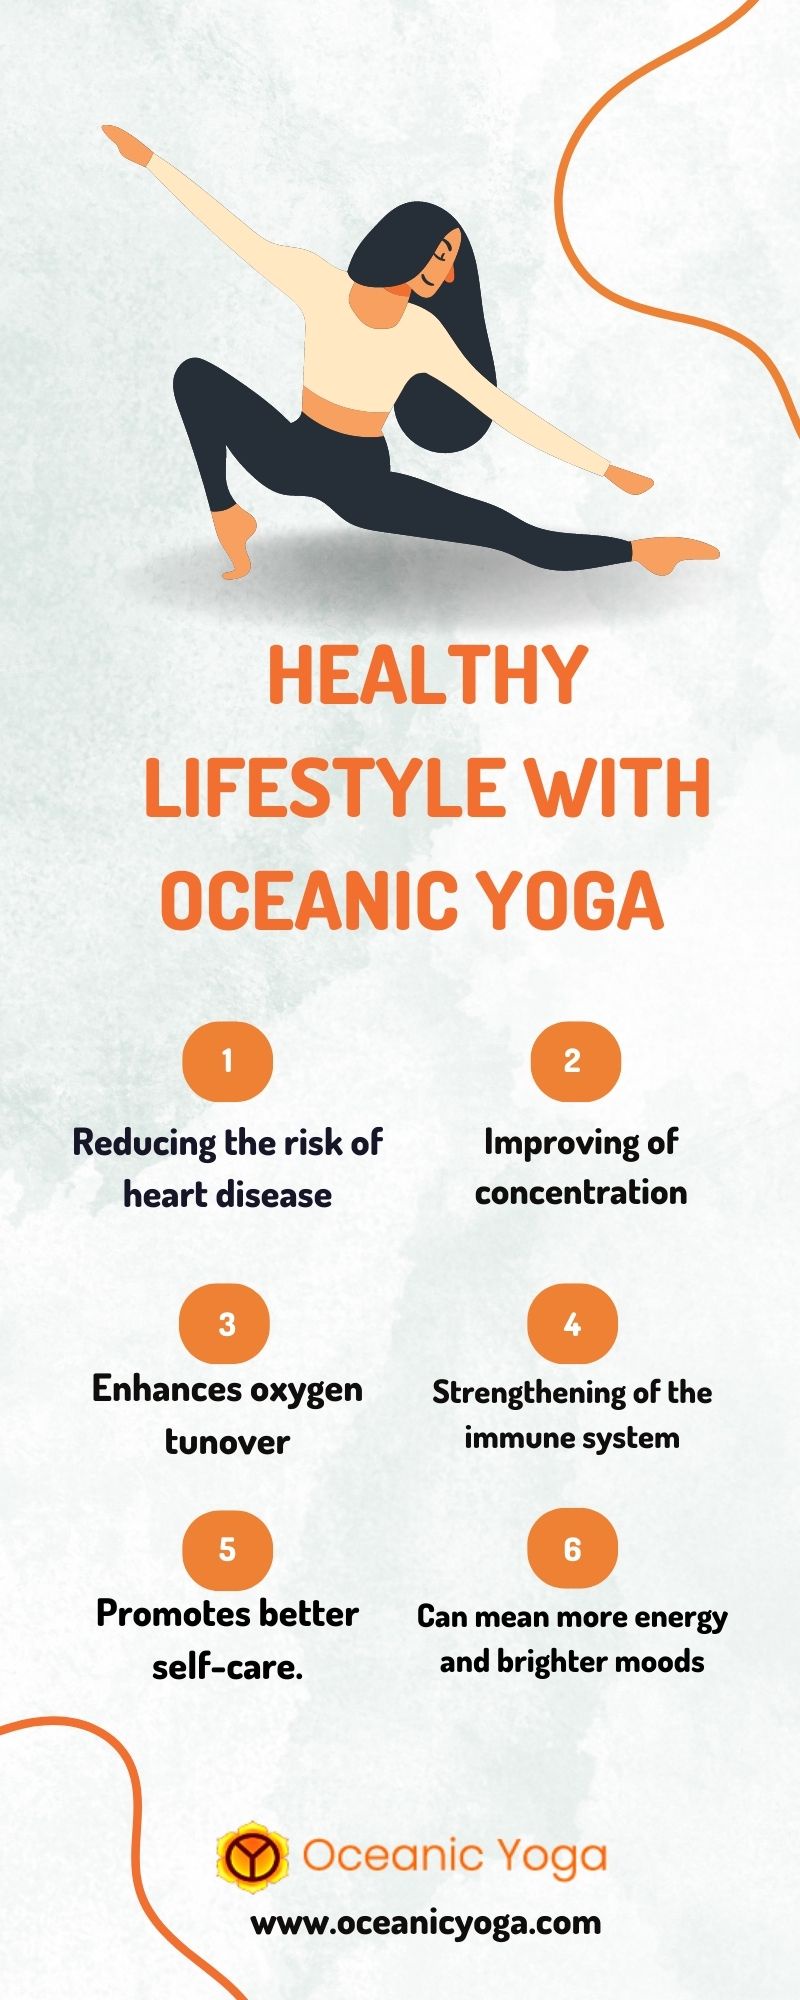 Get the top class training from top yoga teachers training school in India